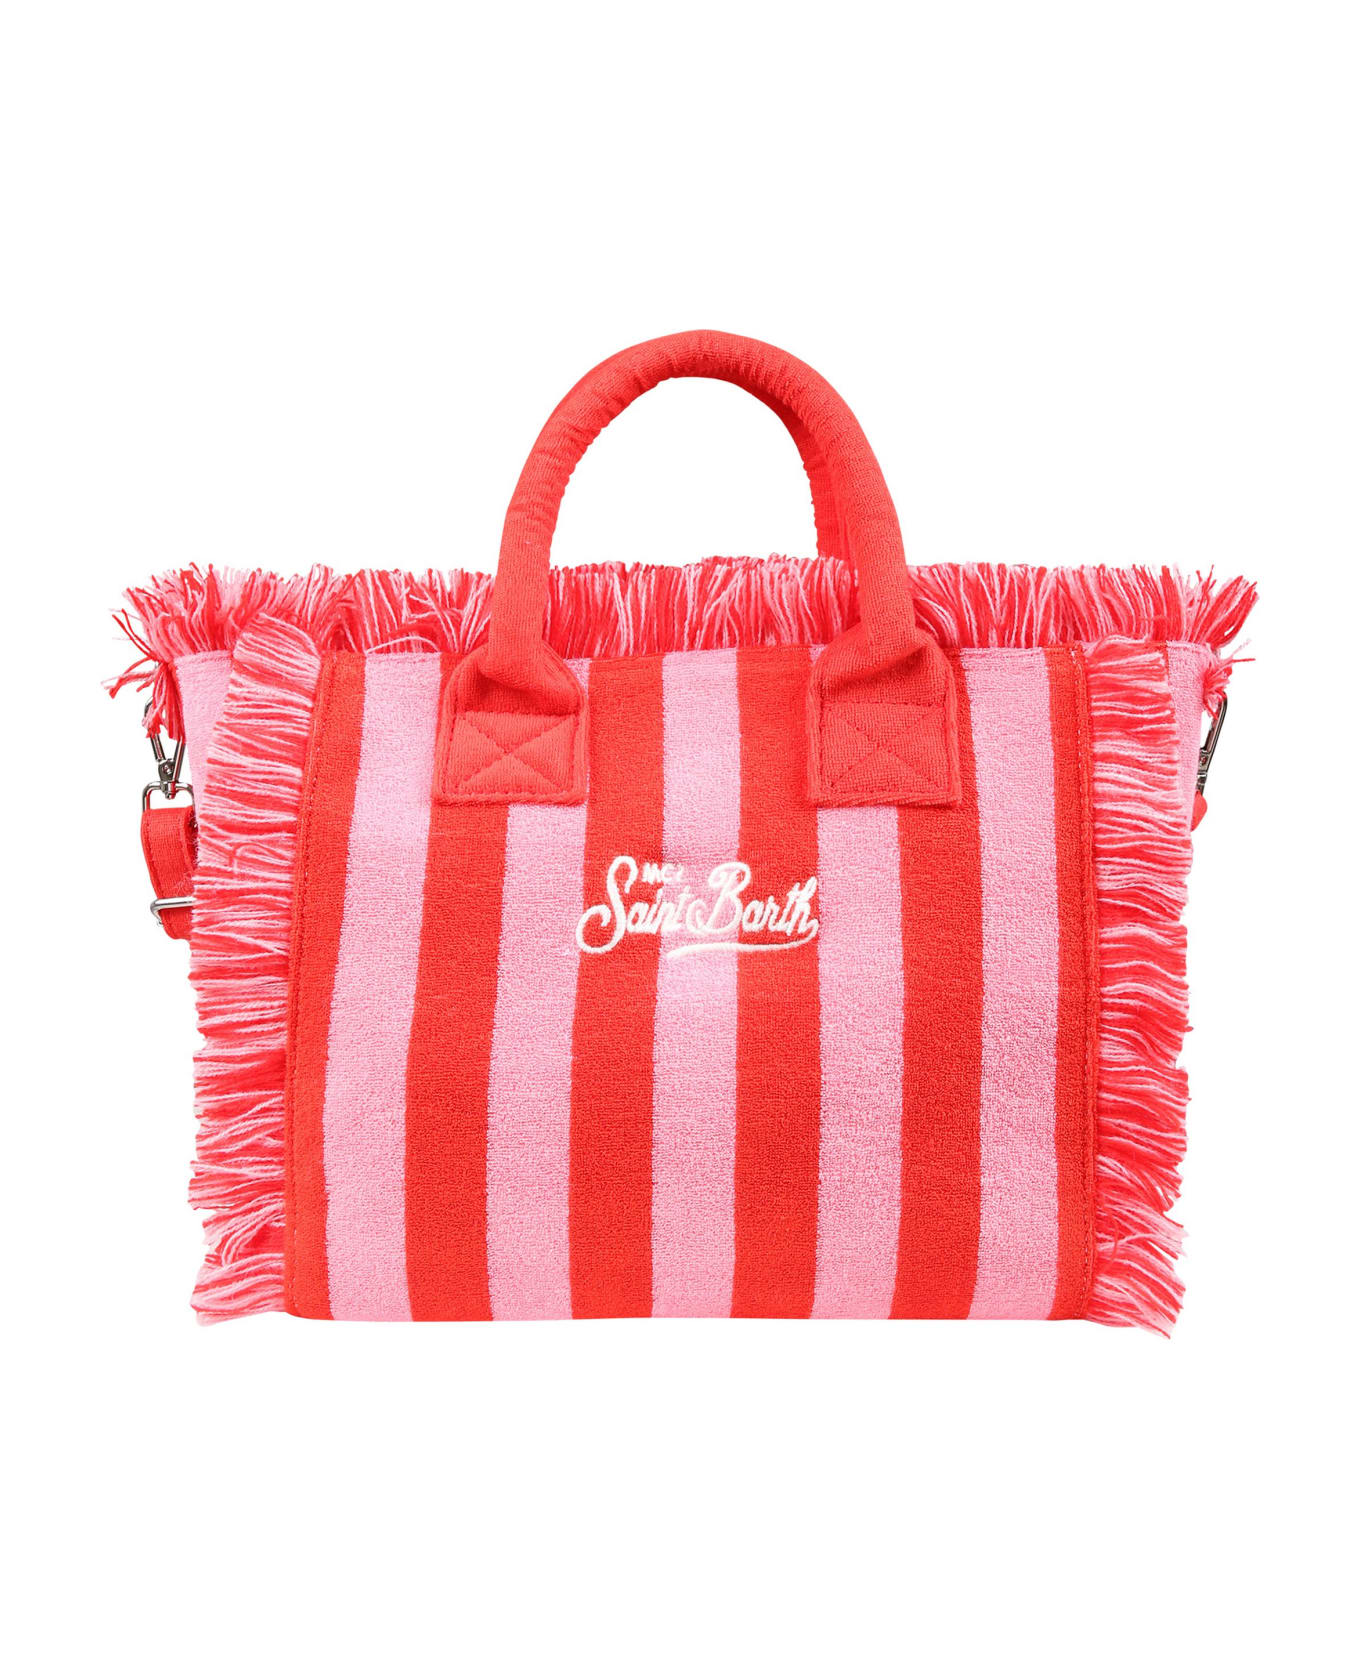 MC2 Saint Barth Red Bag For Girl With Logo - Multicolor